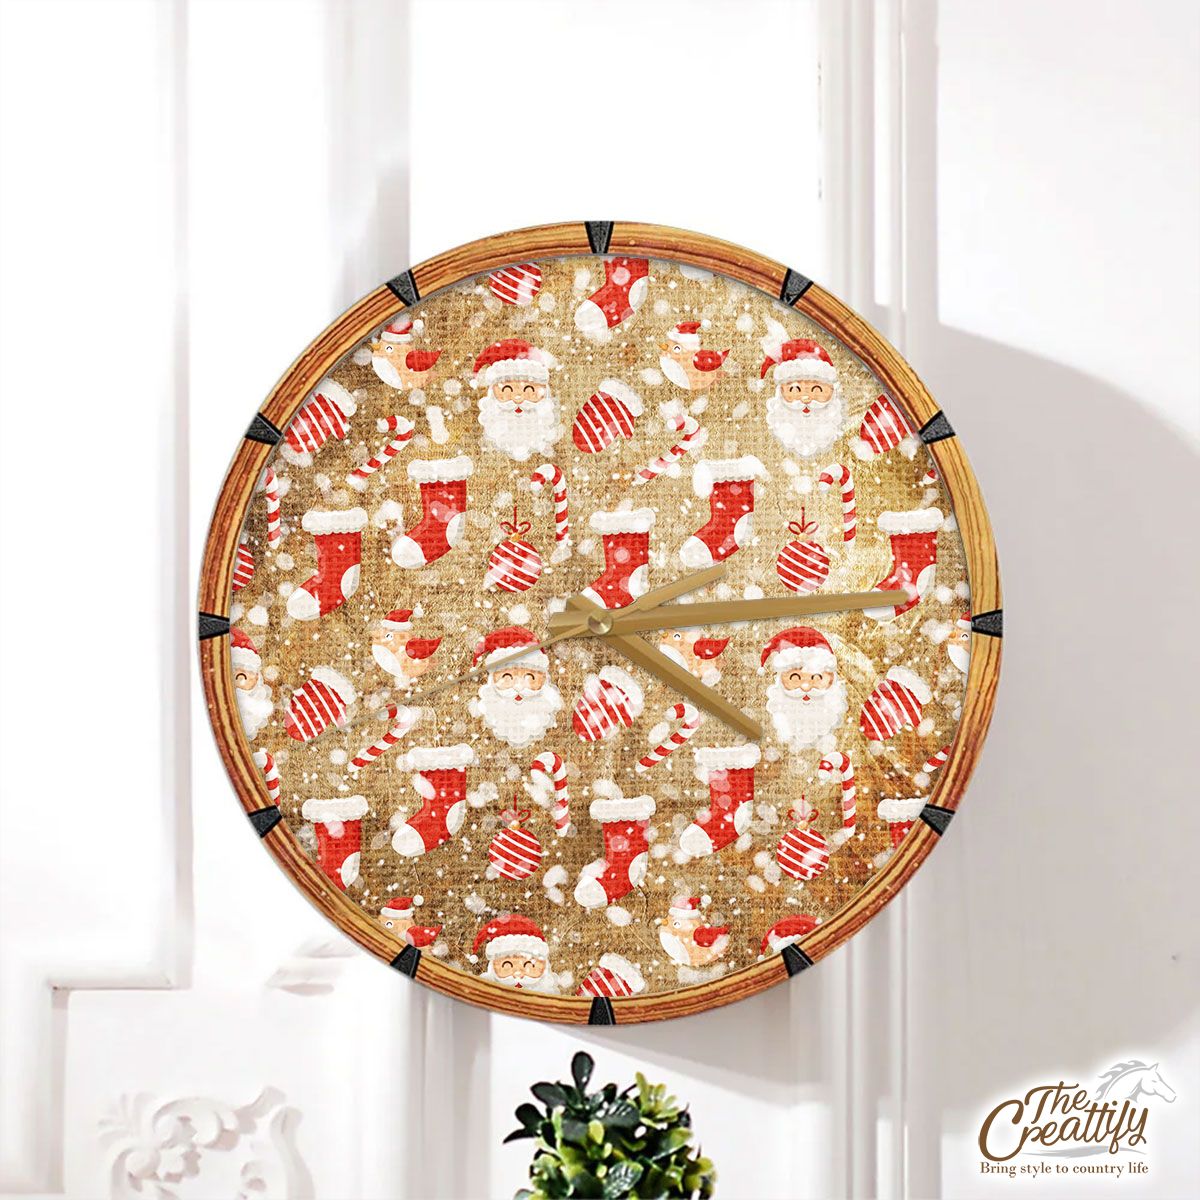 Santa Clause, Red Socks, Candy Canes And Cardinal Bird On Snowflake Wall Clock